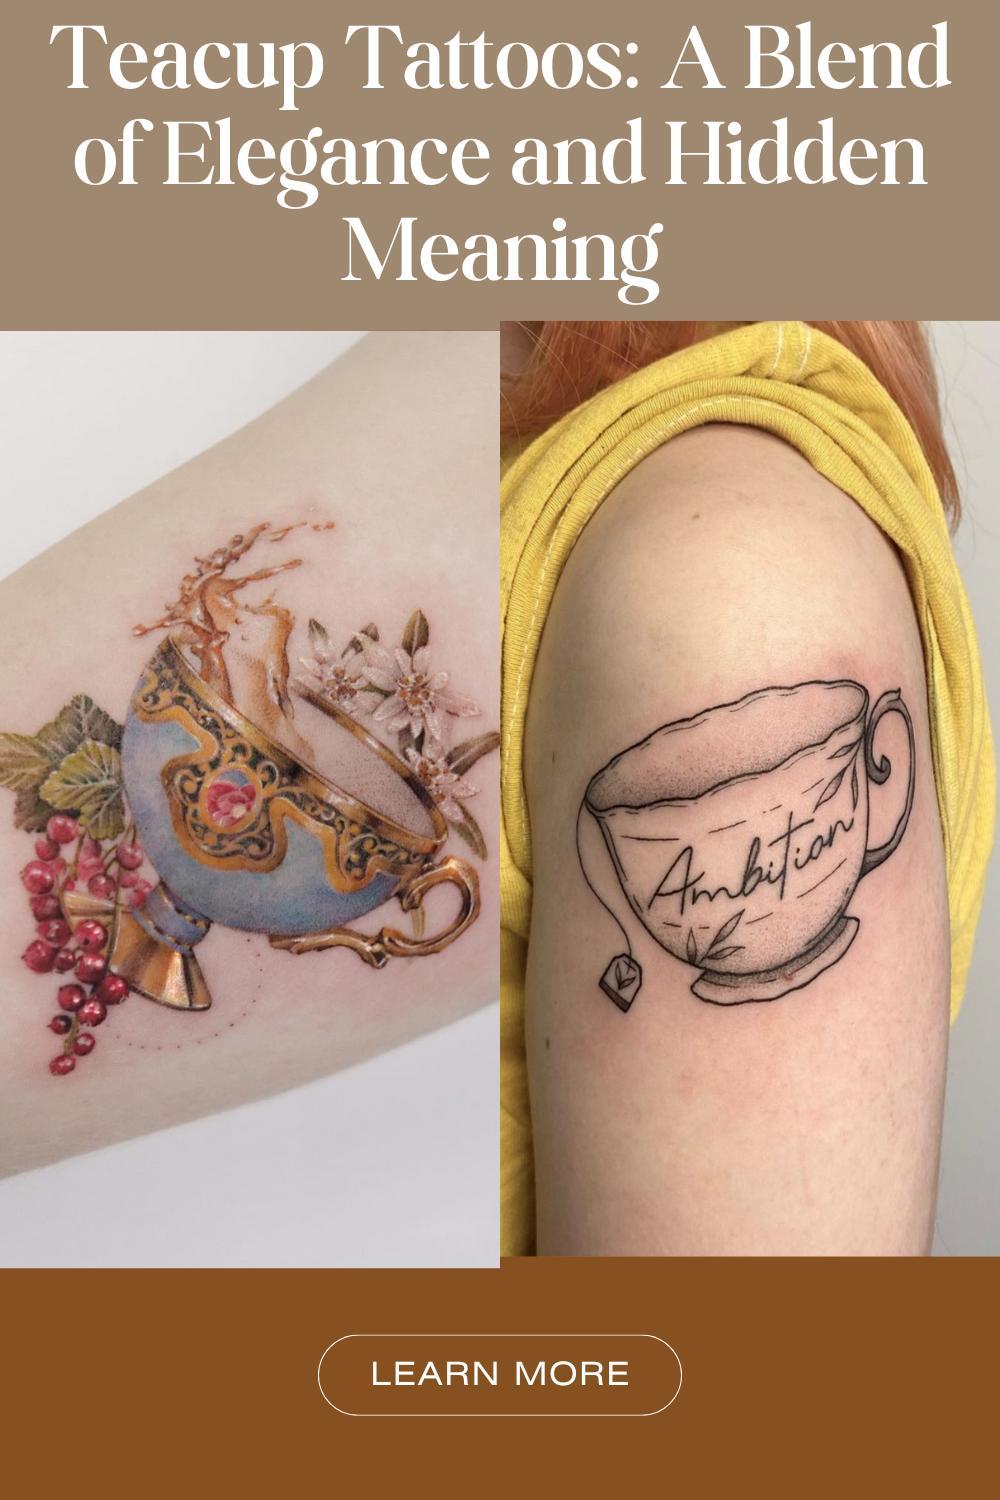 Teacup Tattoos A Blend of Elegance and Hidden Meaning